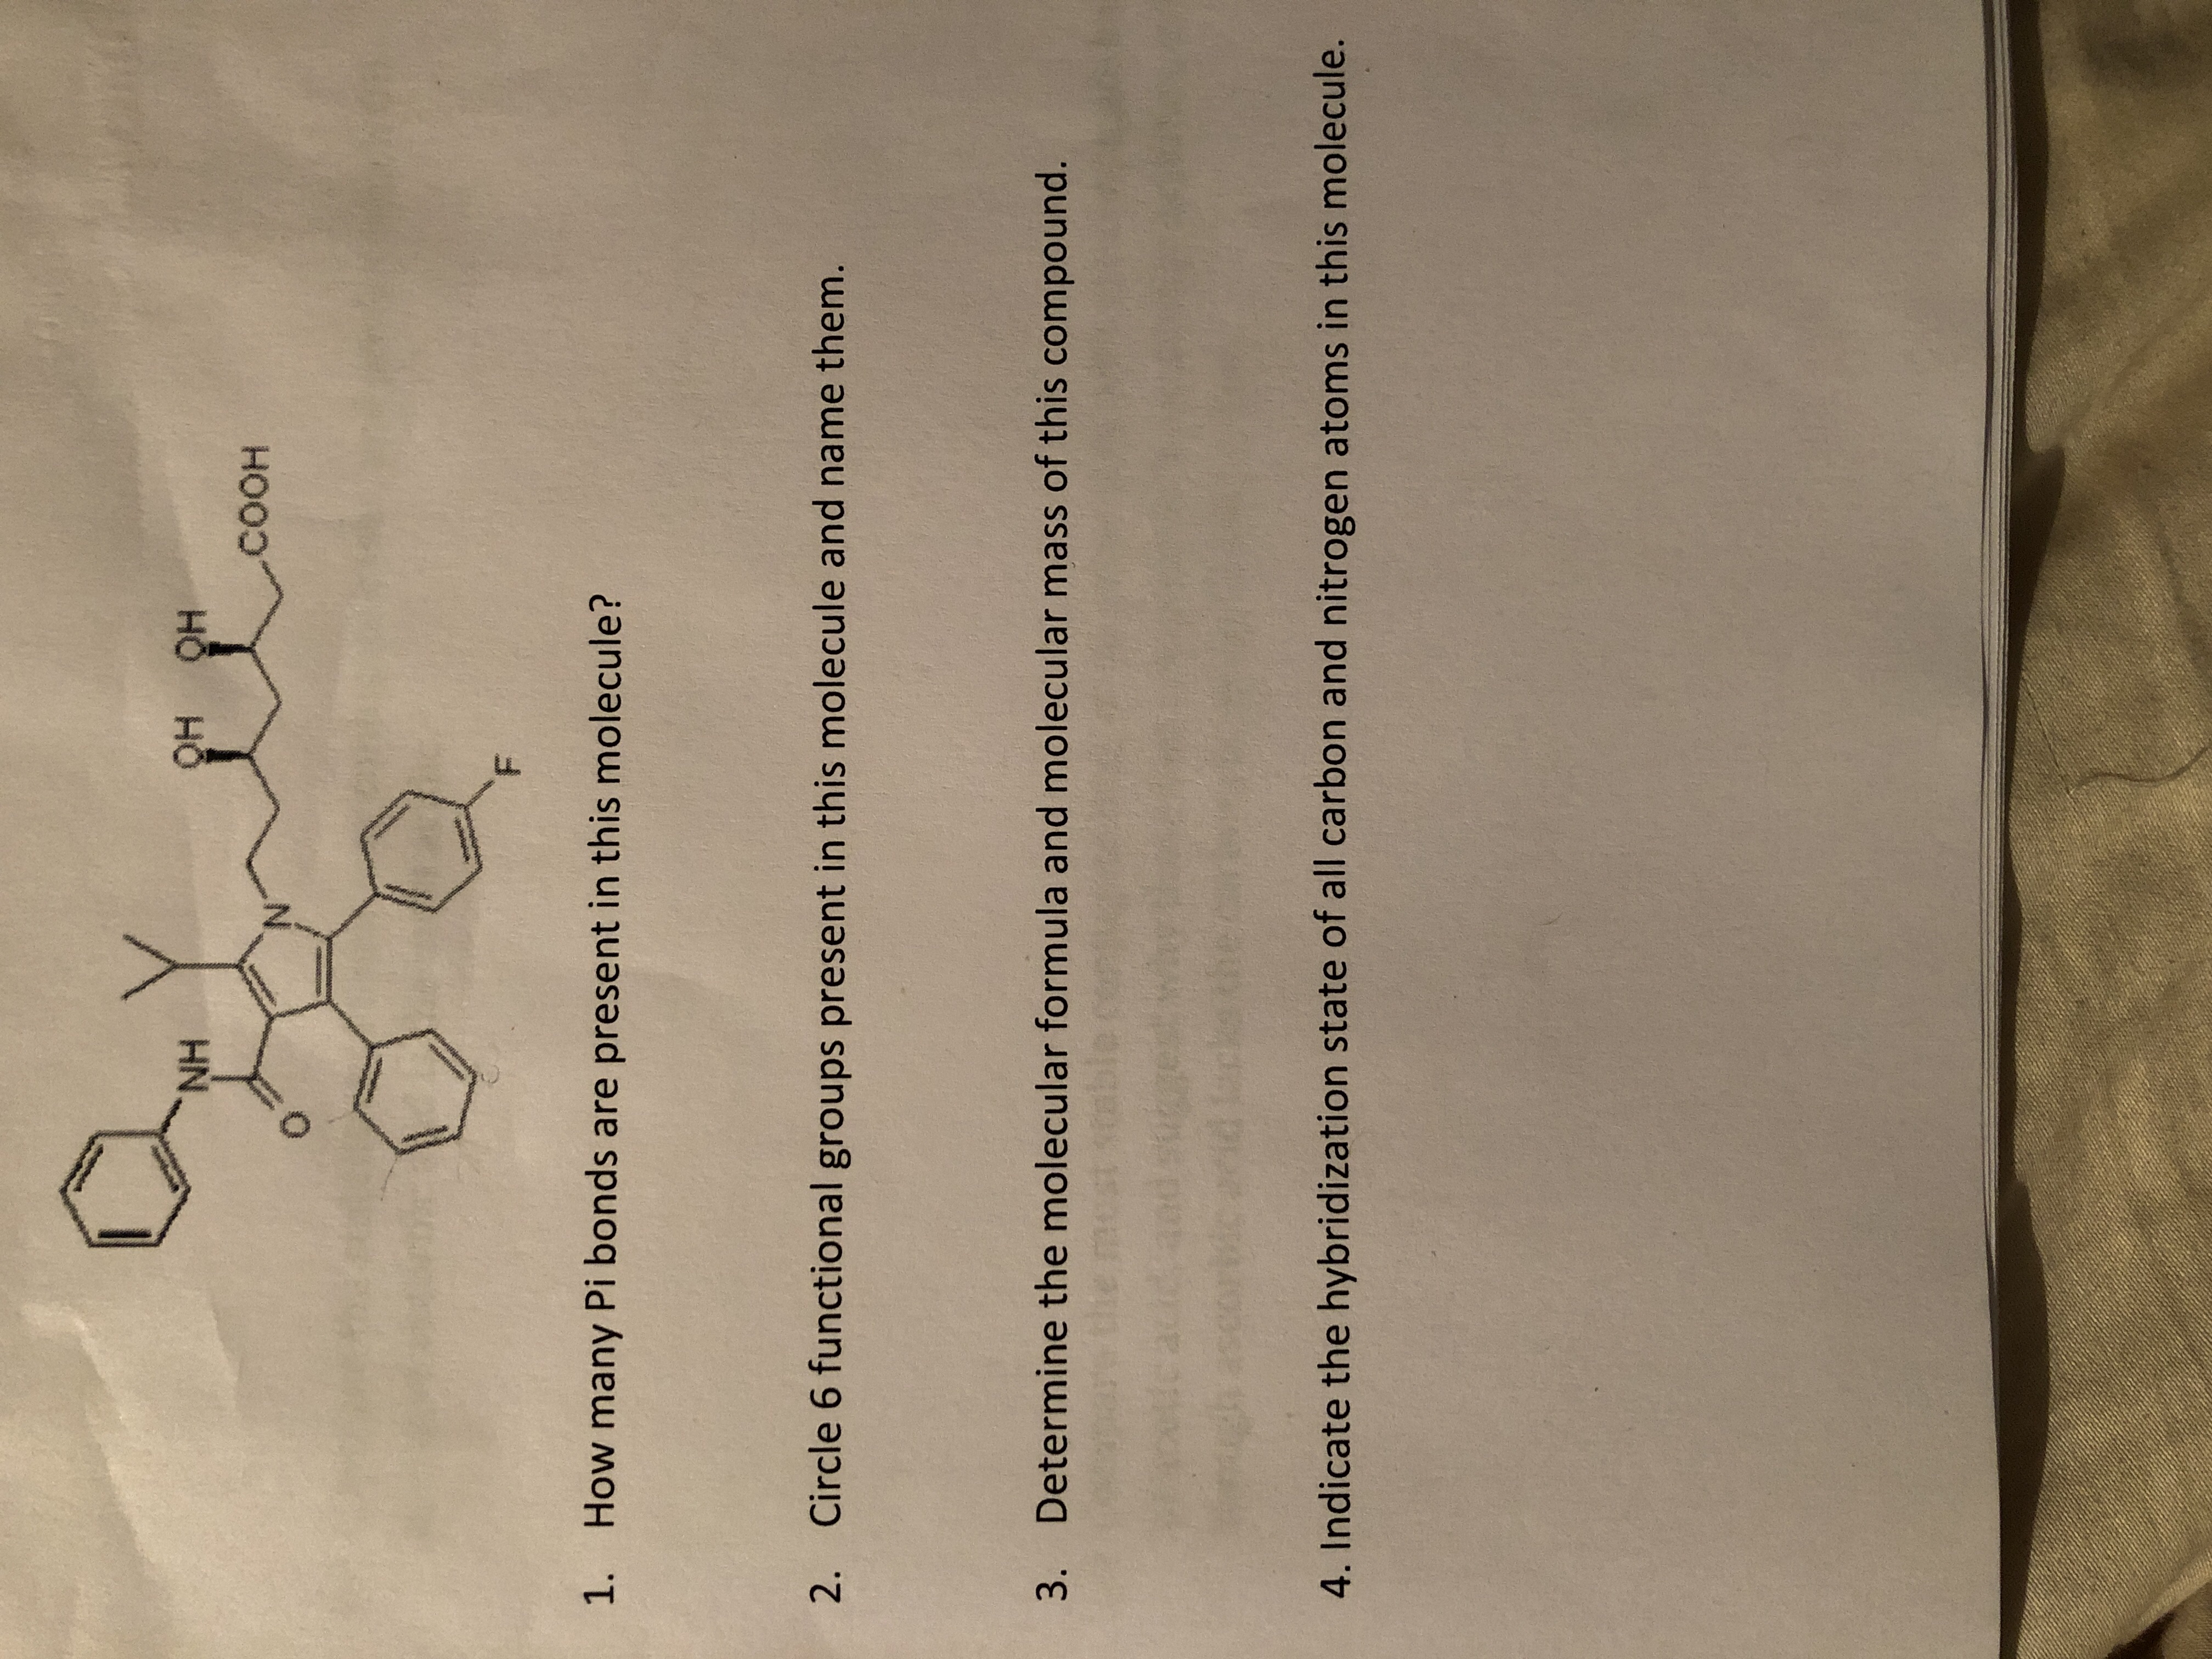 NH
соон
1.
How many Pi bonds are present in this molecule?
2.
Circle 6 functional groups present in this molecule and name them.
3.
Determine the molecular formula and molecular mass of this compound.
4. Indicate the hybridization state of all carbon and nitrogen atoms in this molecule.
